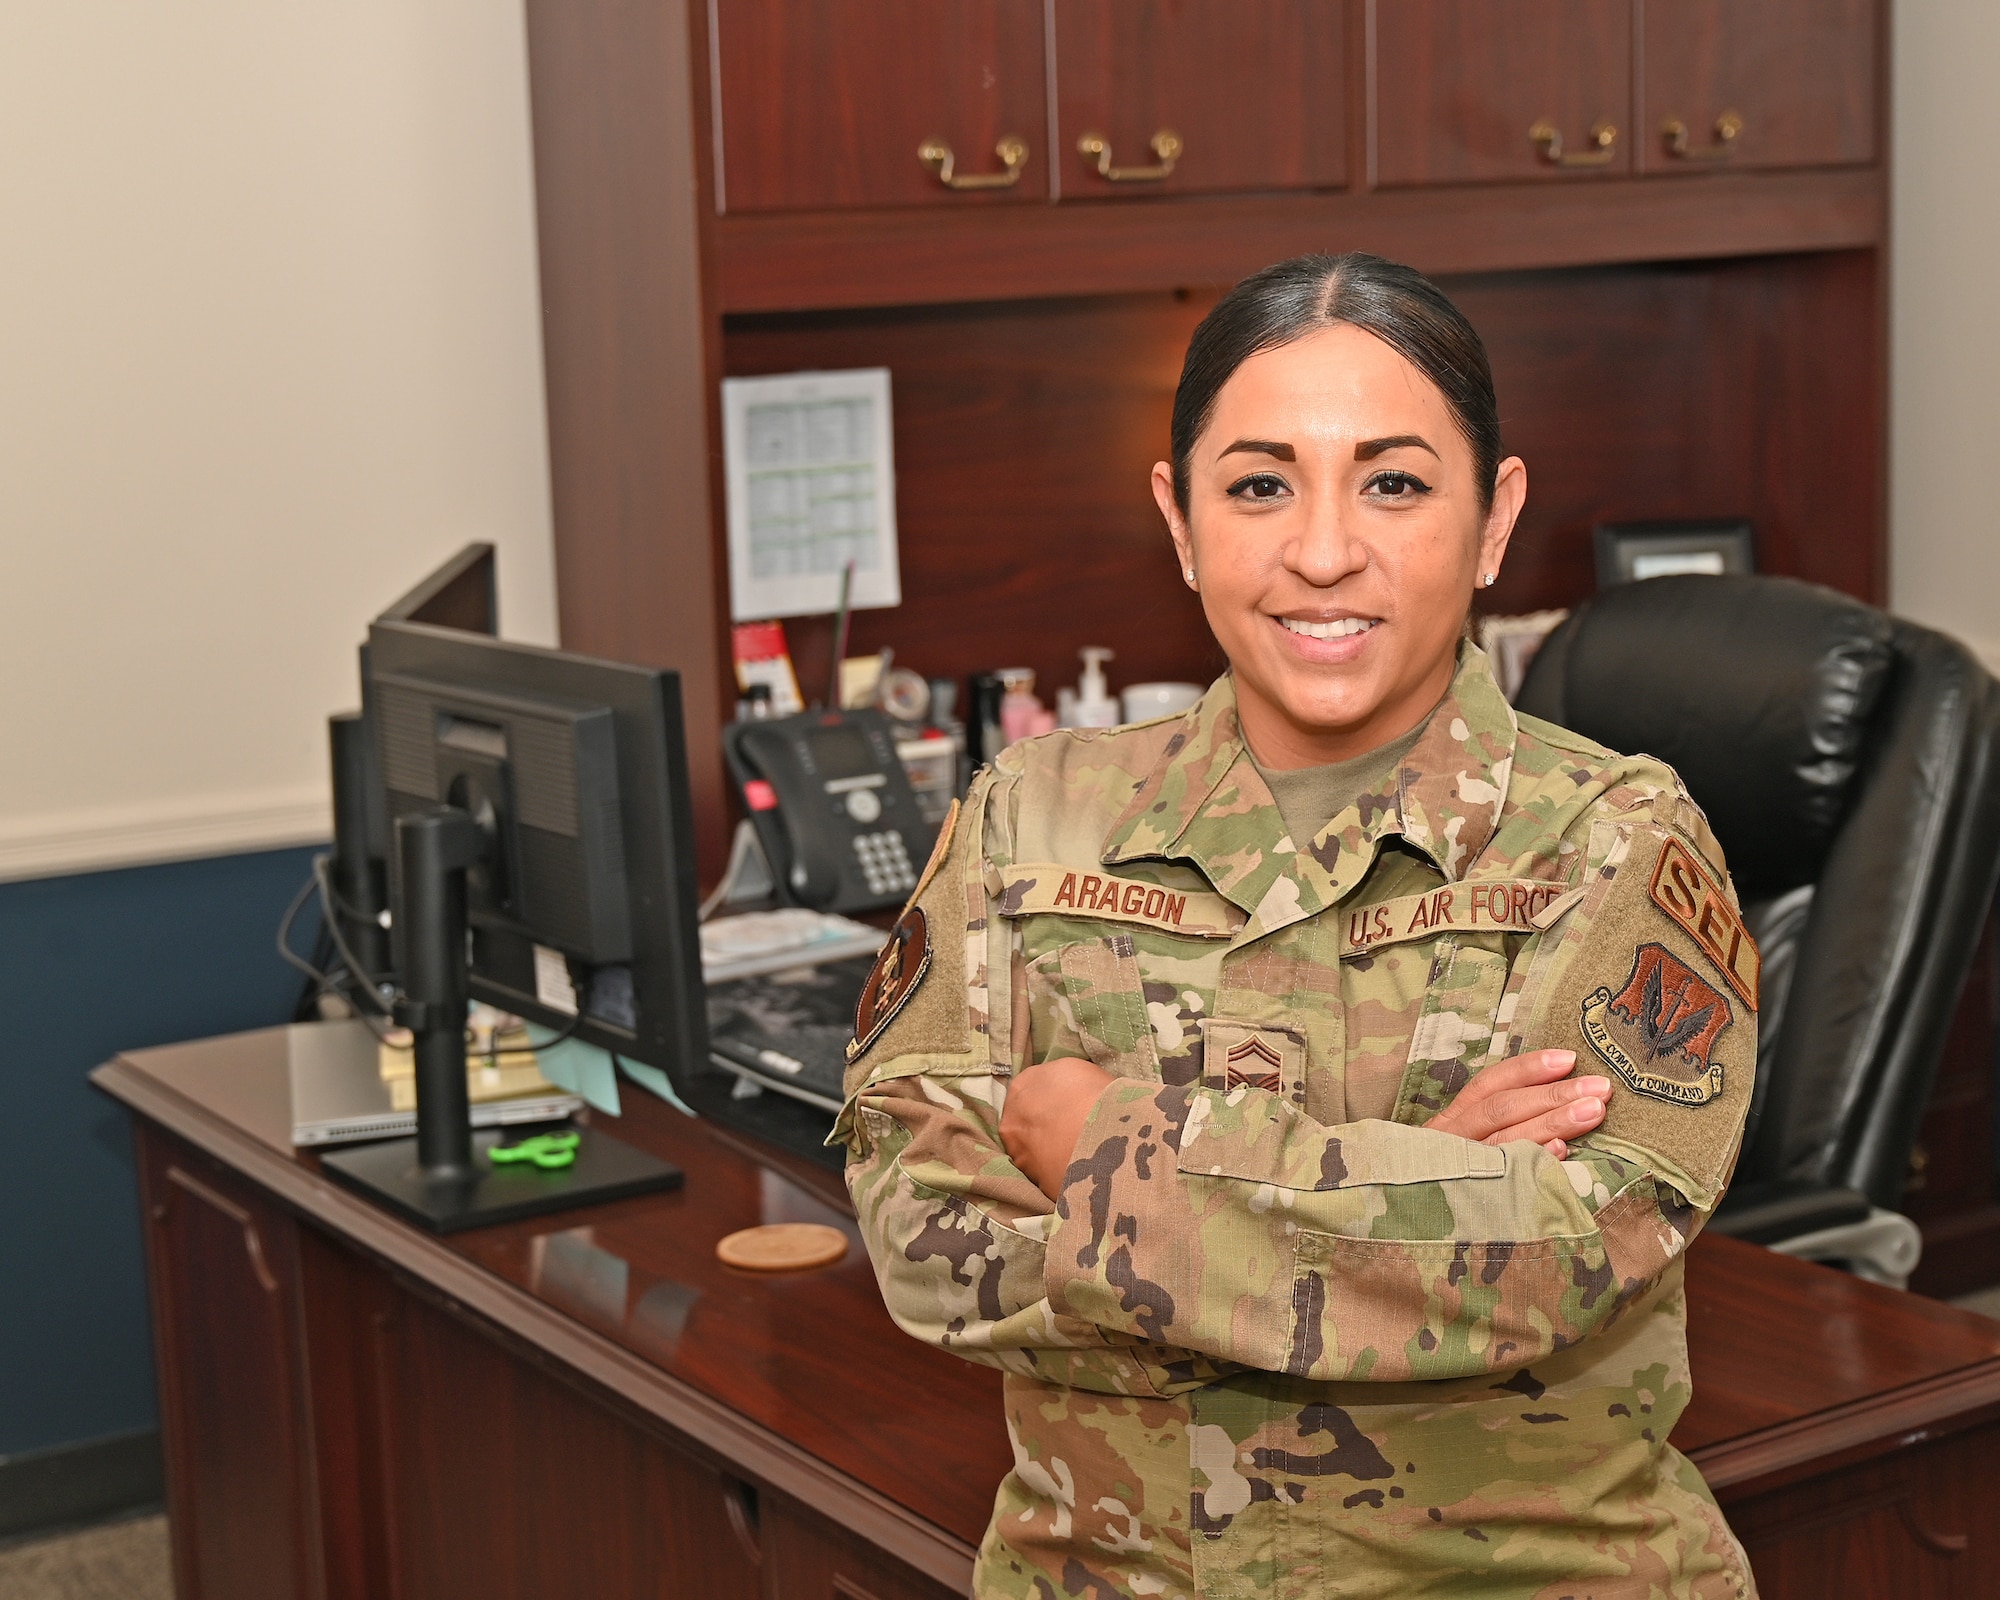 Maryland Air National Guard Senior Master Sgt. Monica Aragon, 175th Logistics Readiness Squadron senior enlisted leader, poses for a photograph at Martin State Air National Guard Base, Middle River, Md., October 11, 2023.